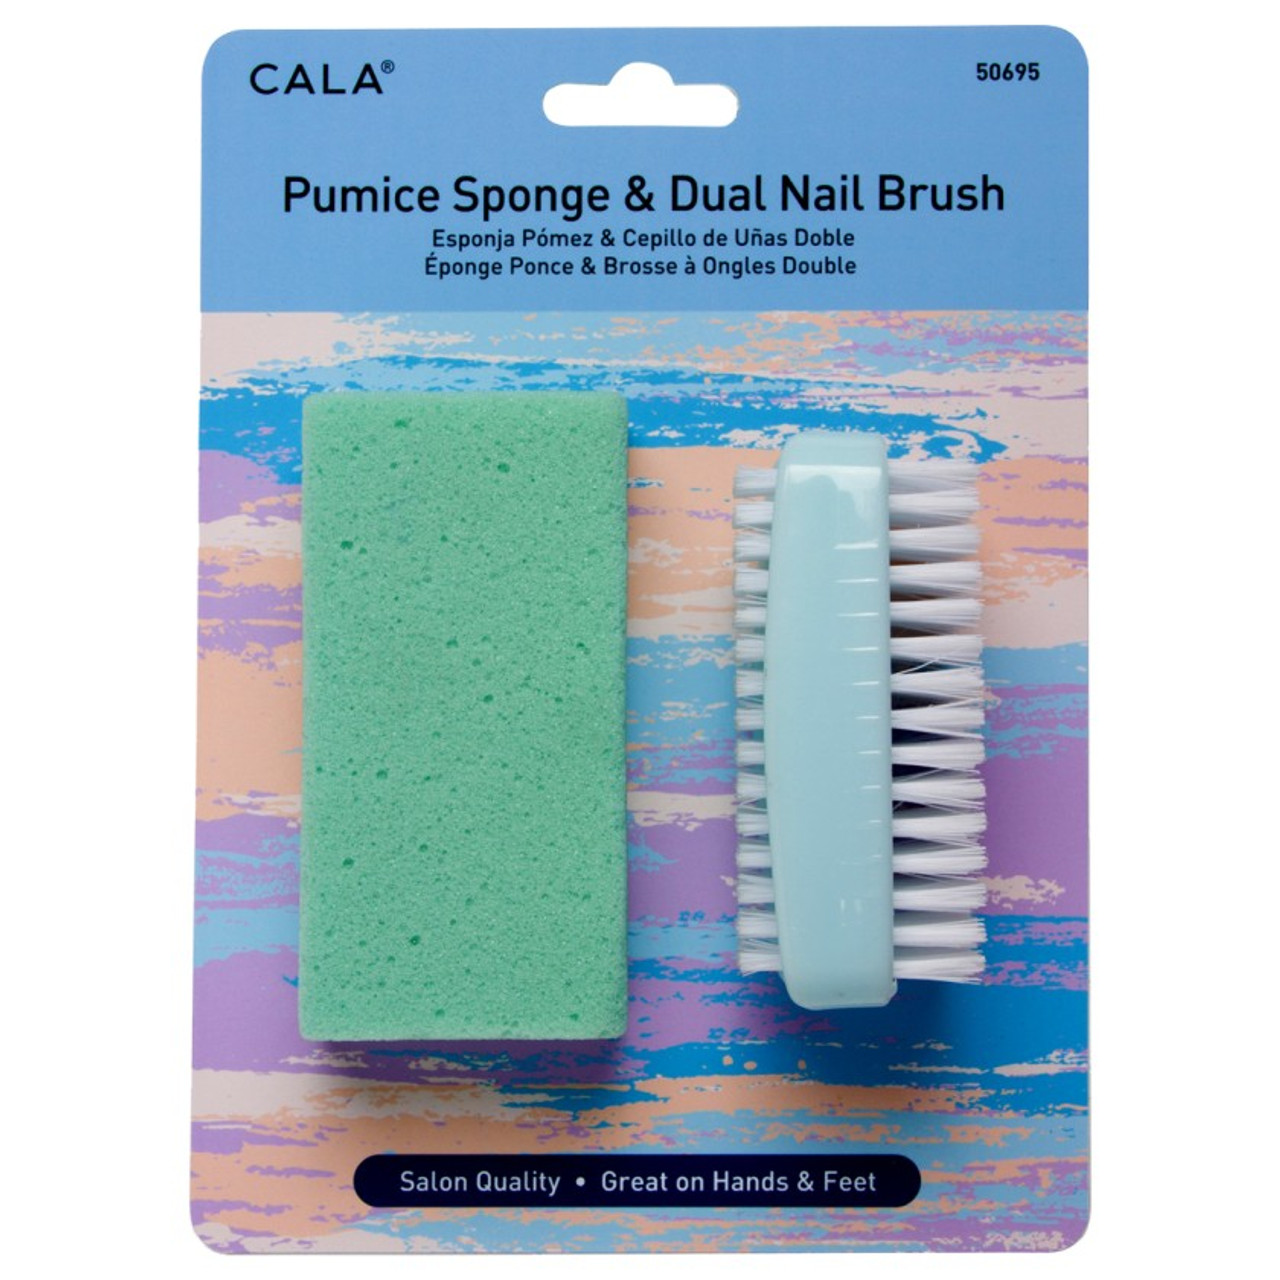 Up To 25% Off on Handle Grip Nail Brush Cleane